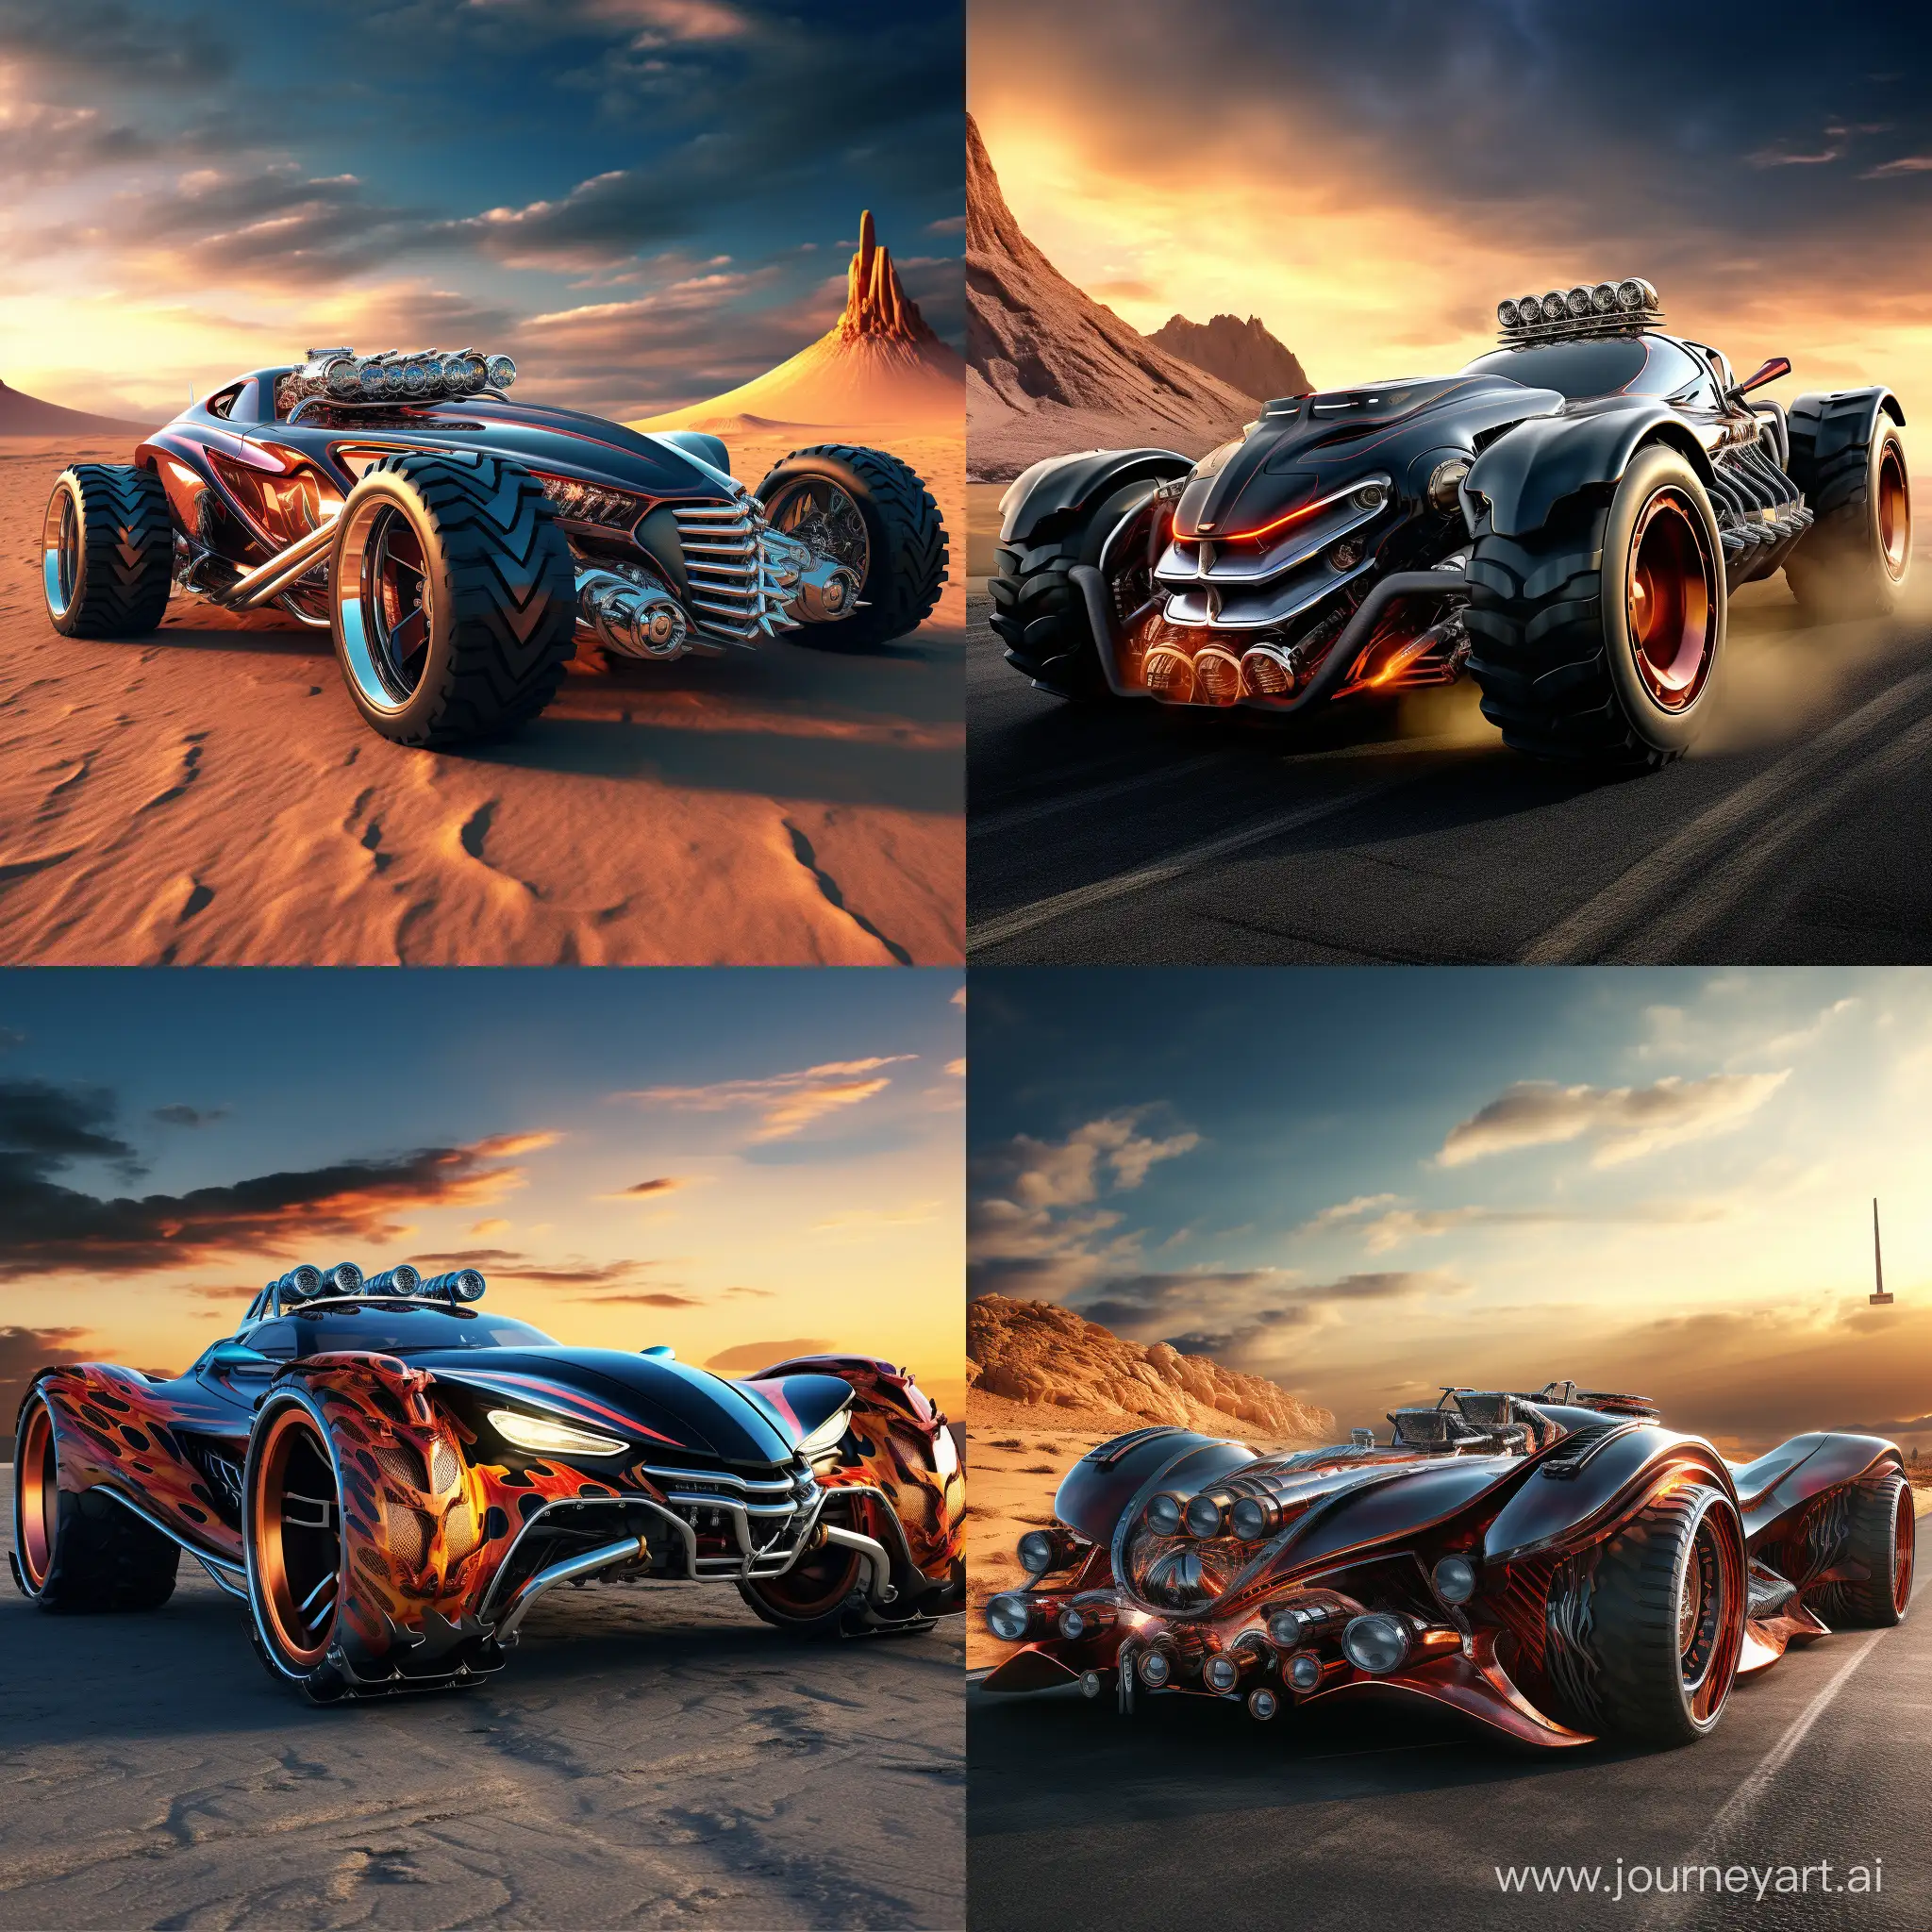 Elaborate-Fire-and-Chrome-Extreme-Sports-Car-Pushed-by-Horned-Devil